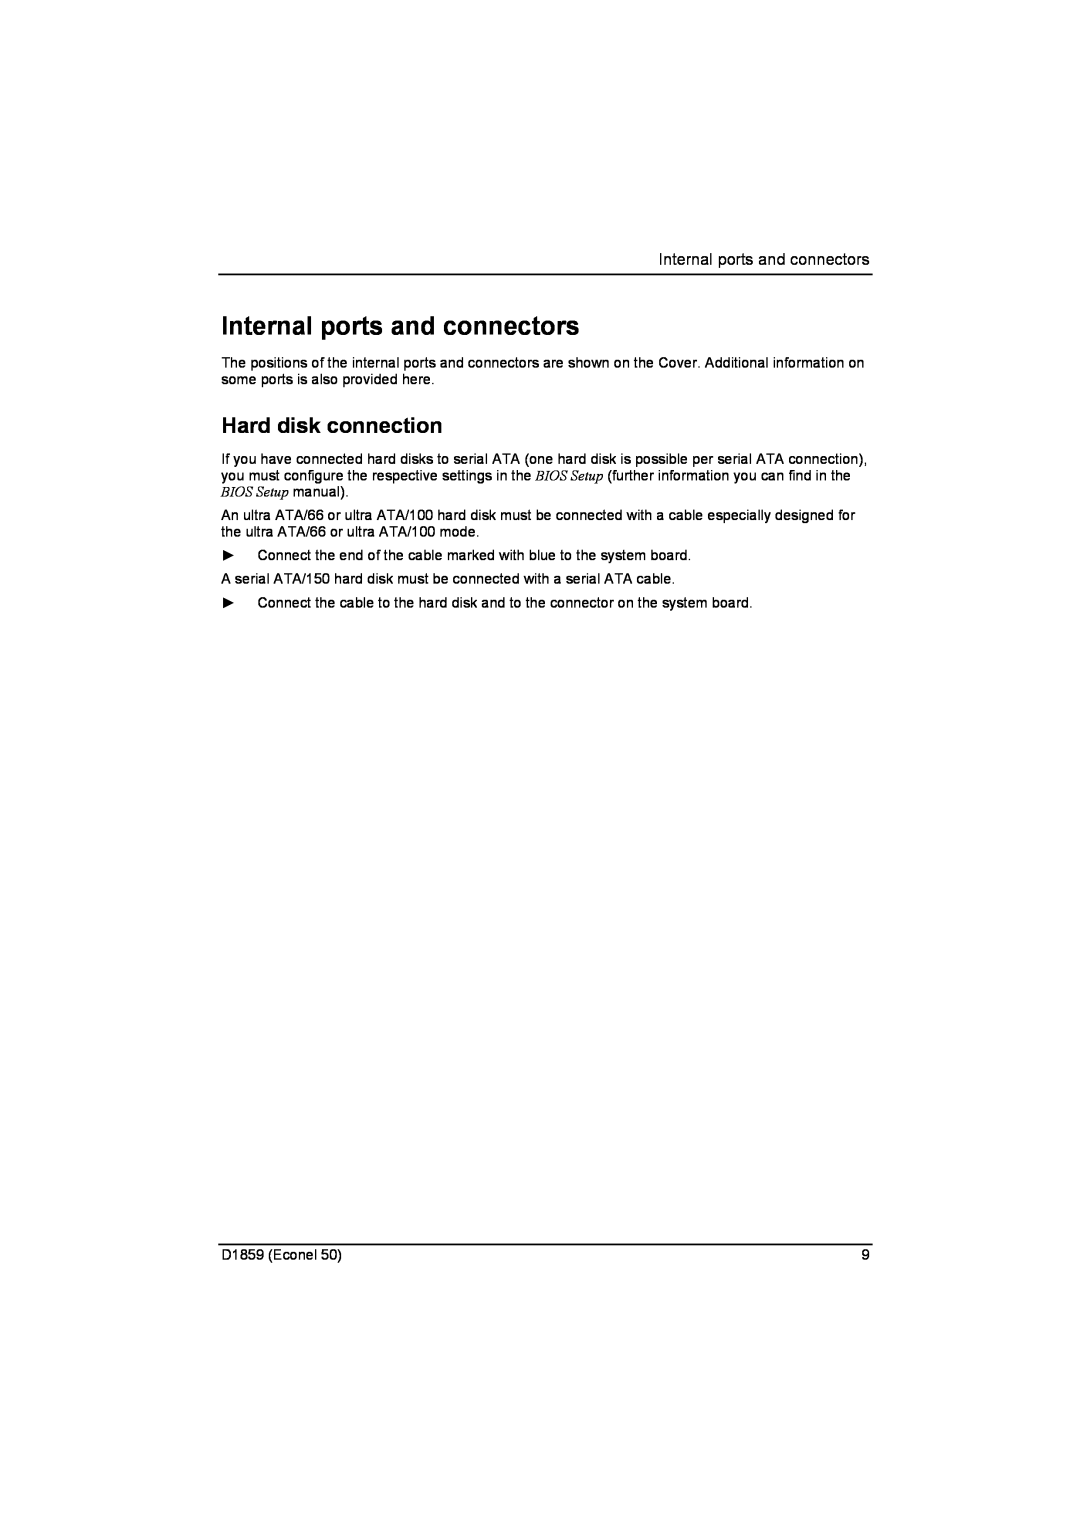 Fujitsu D1859 technical manual Internal ports and connectors, Hard disk connection 